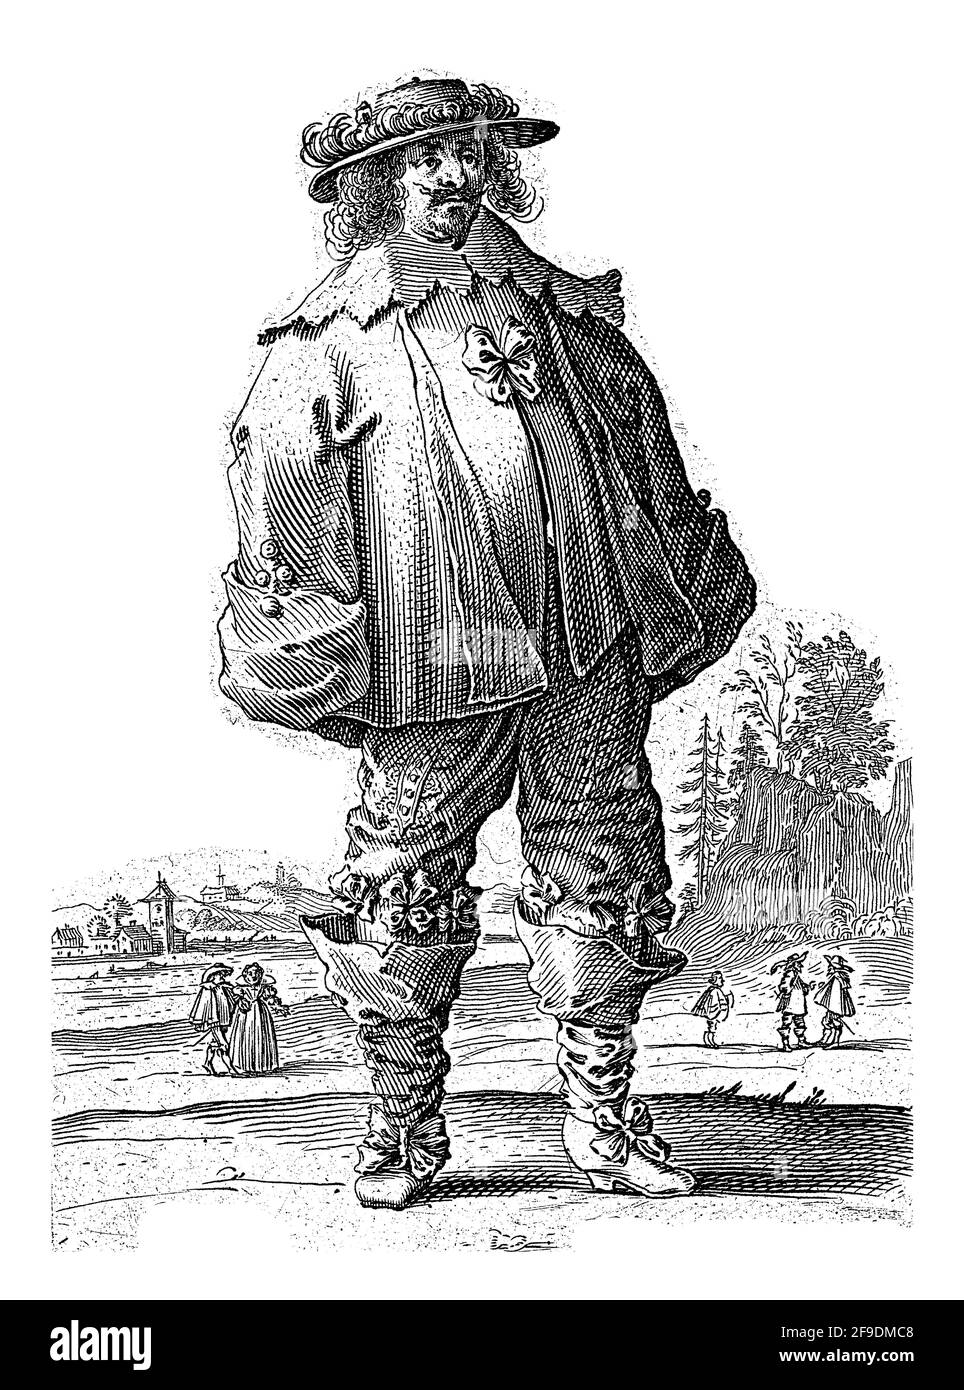 Standing man in a landscape, dressed according to Dutch fashion circa 1625-35. In the background the contours of a village and some figures. Stock Photo